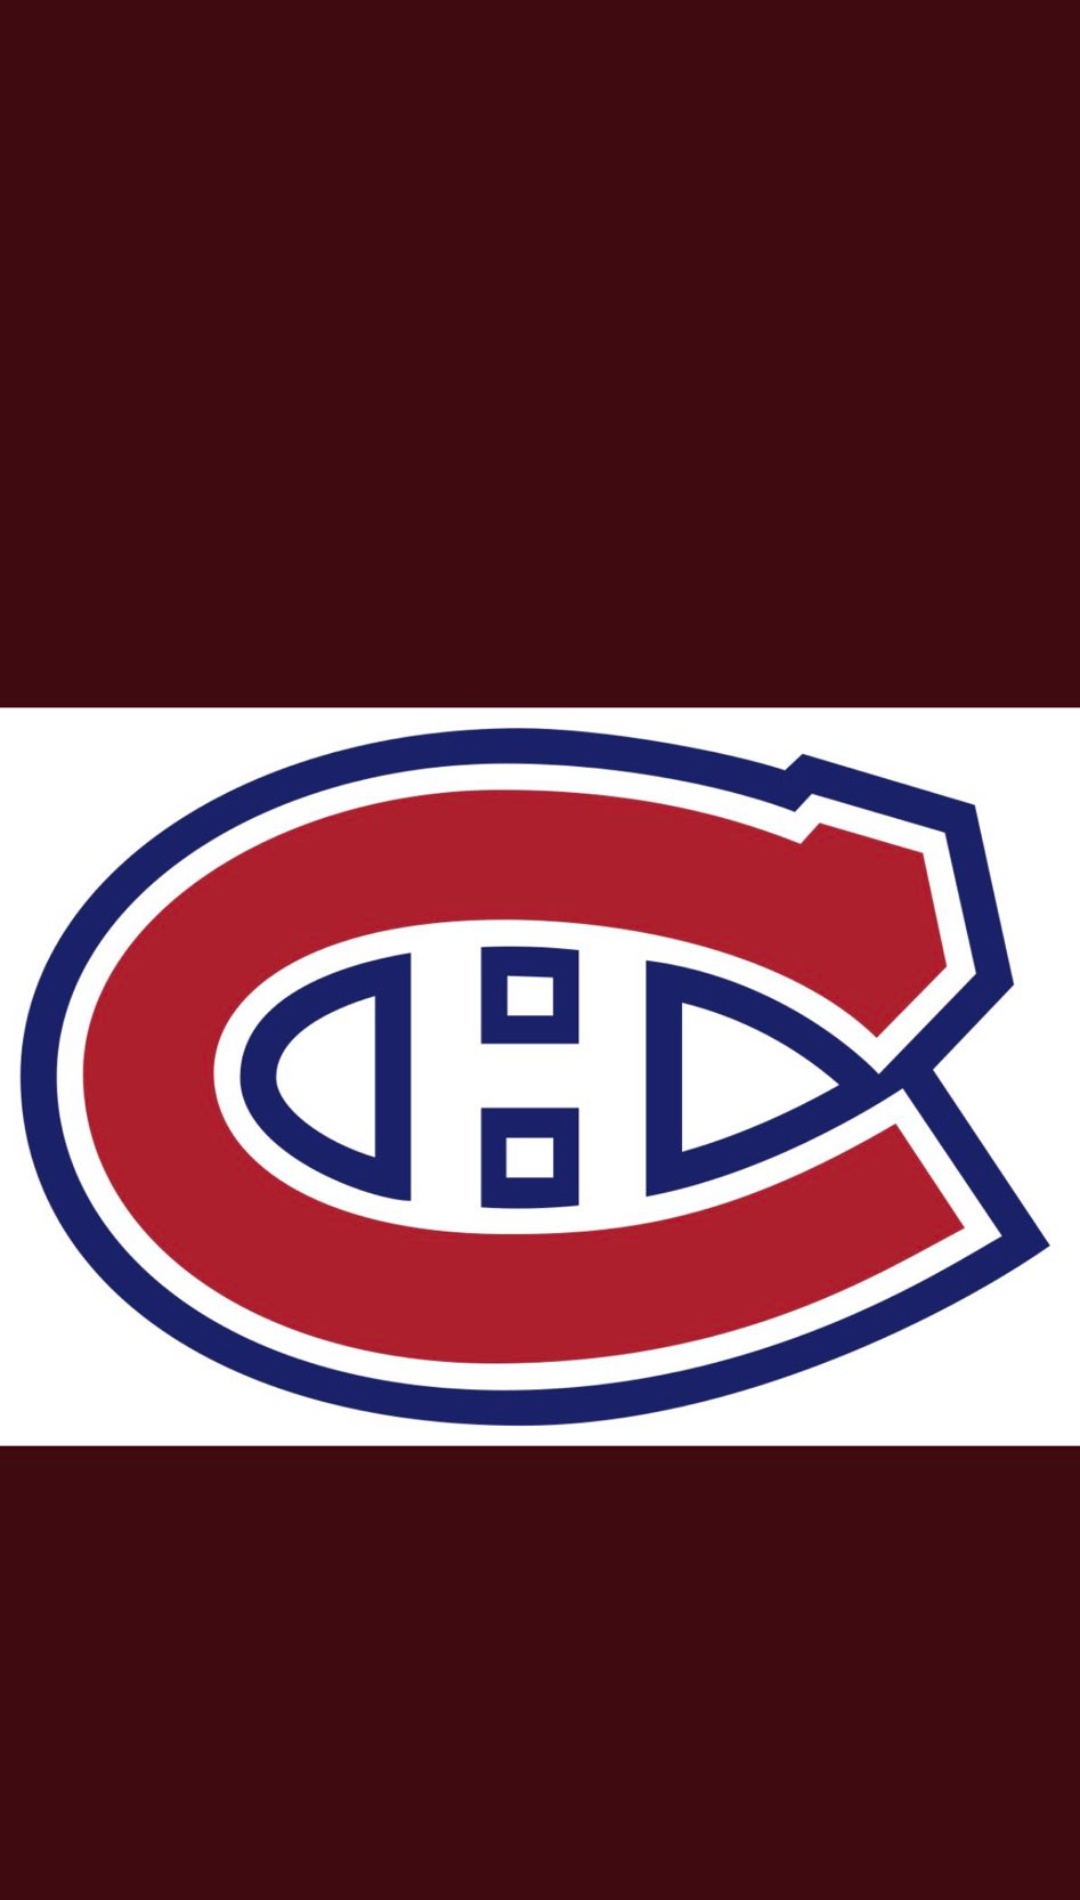 Montreal Canadiens Wallpaper Images